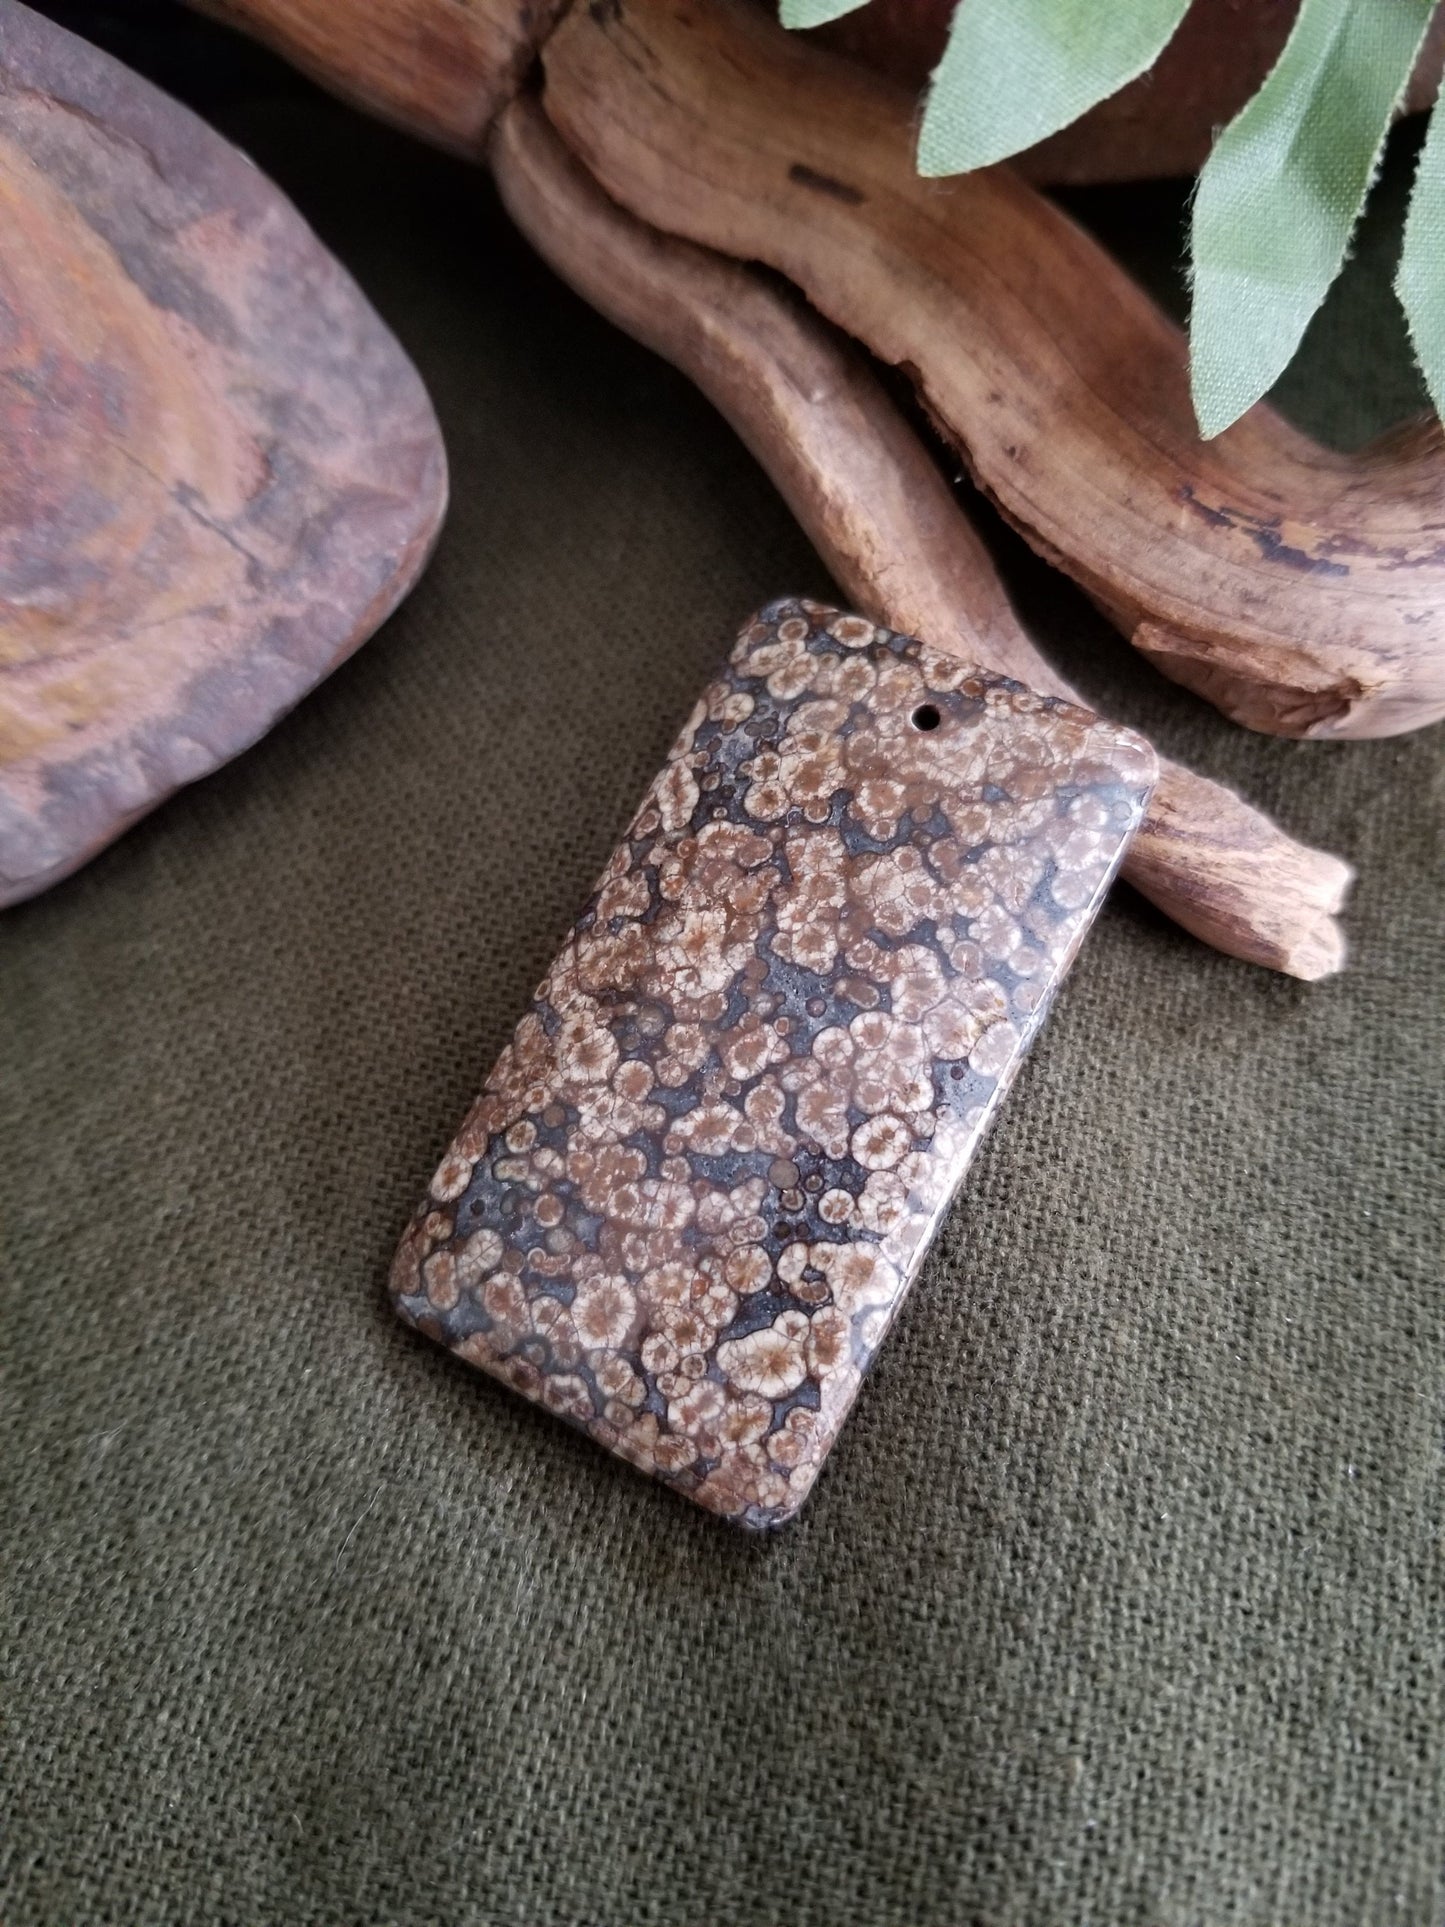 Fossilized coral rectangular bead with black, grey, and brown tones.